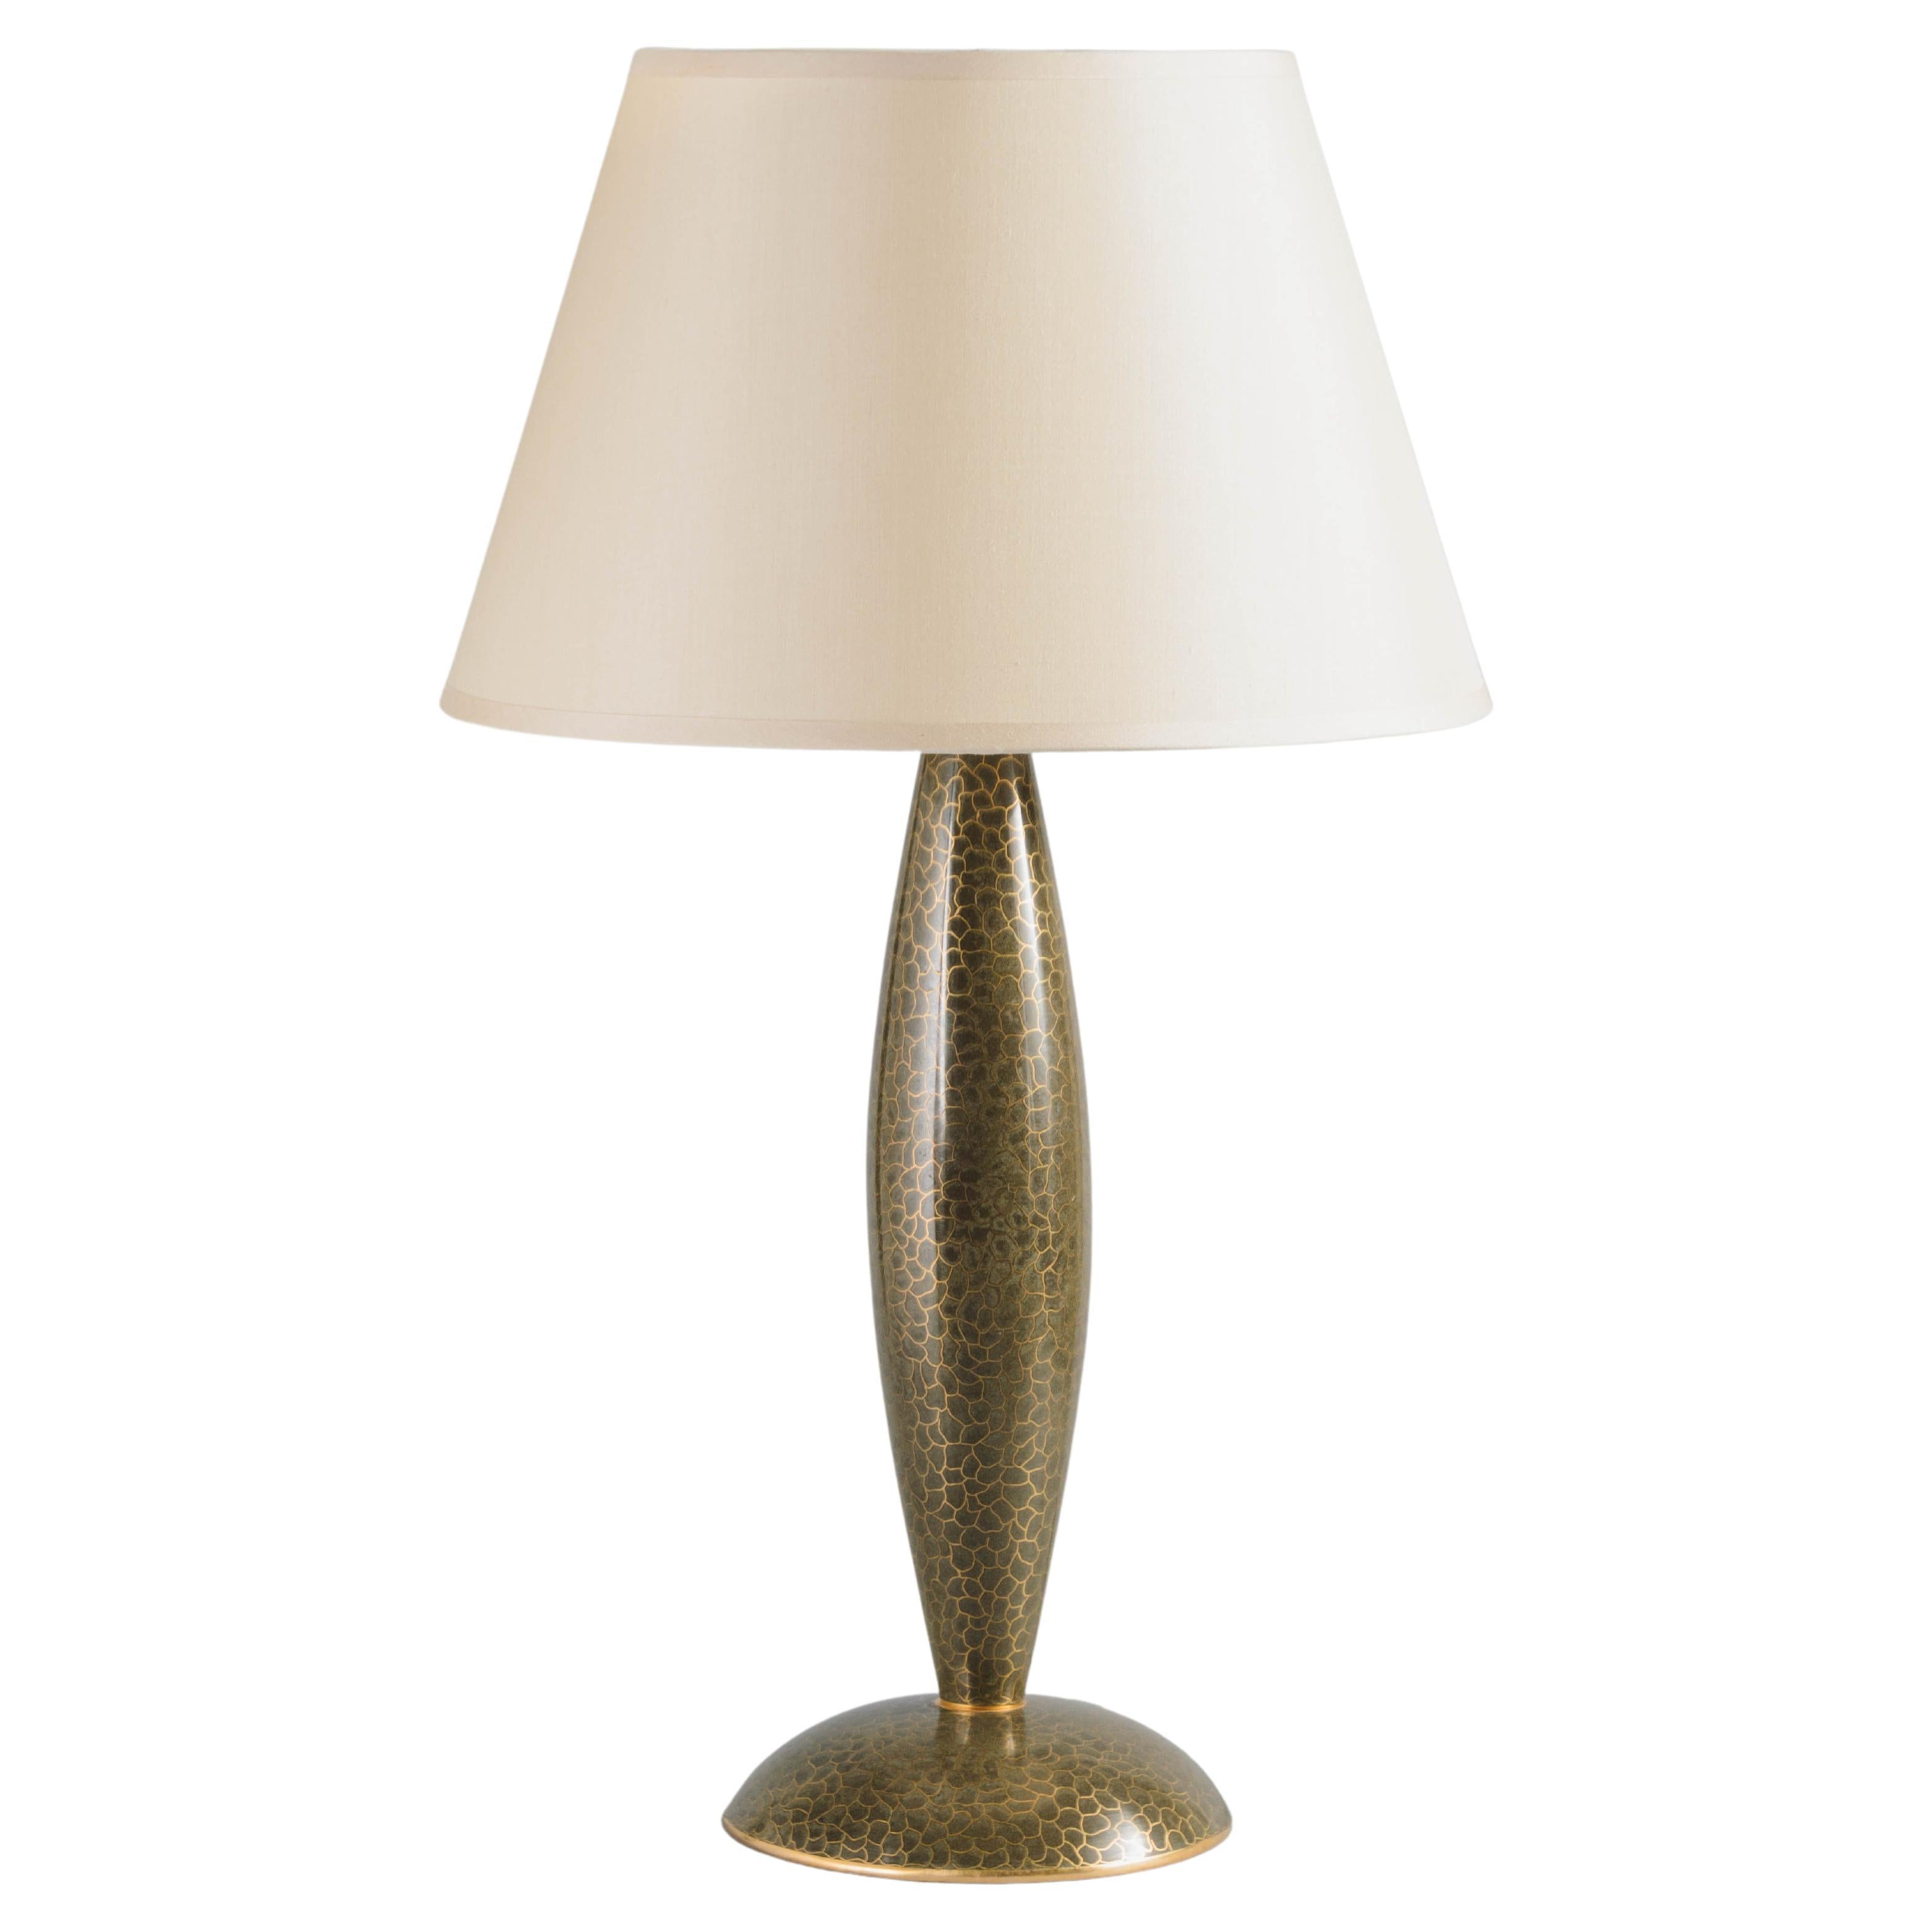 Contemporary Cloisonné Baluster Lamp in Moss by Robert Kuo, Limited Edition For Sale